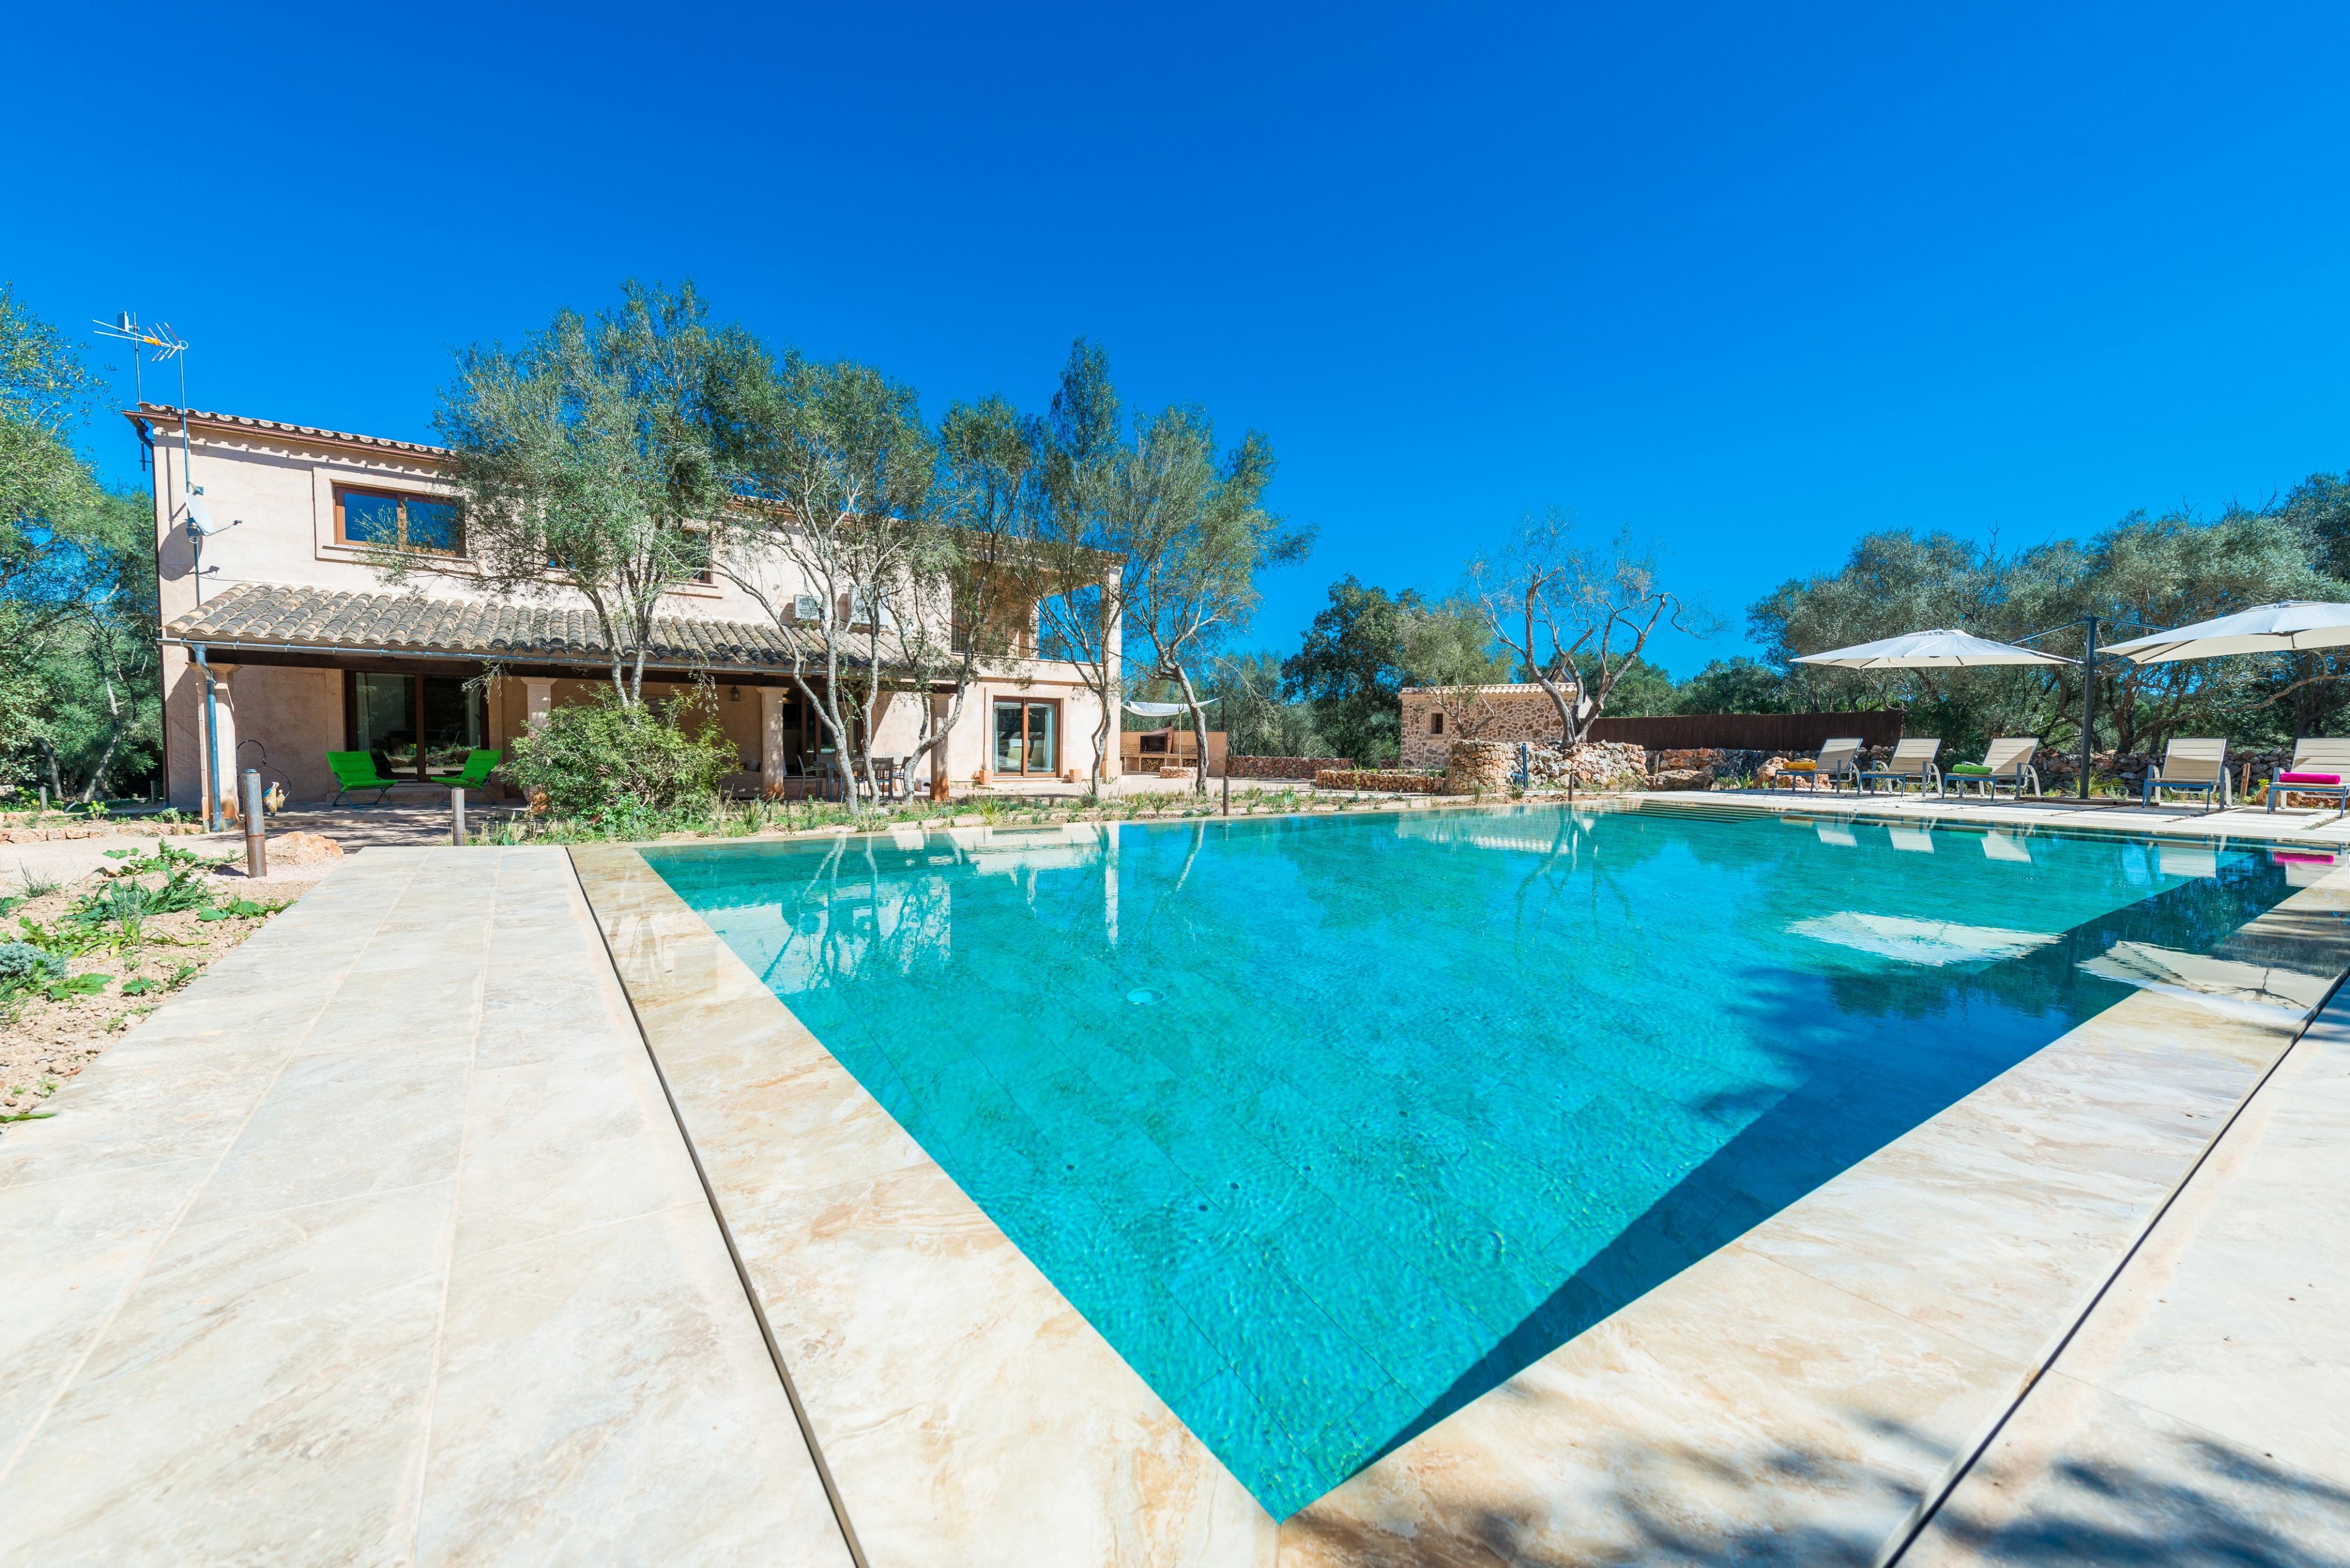 Property Image 2 - CAN MADIS - Villa with private pool in Costitx. Free WiFi